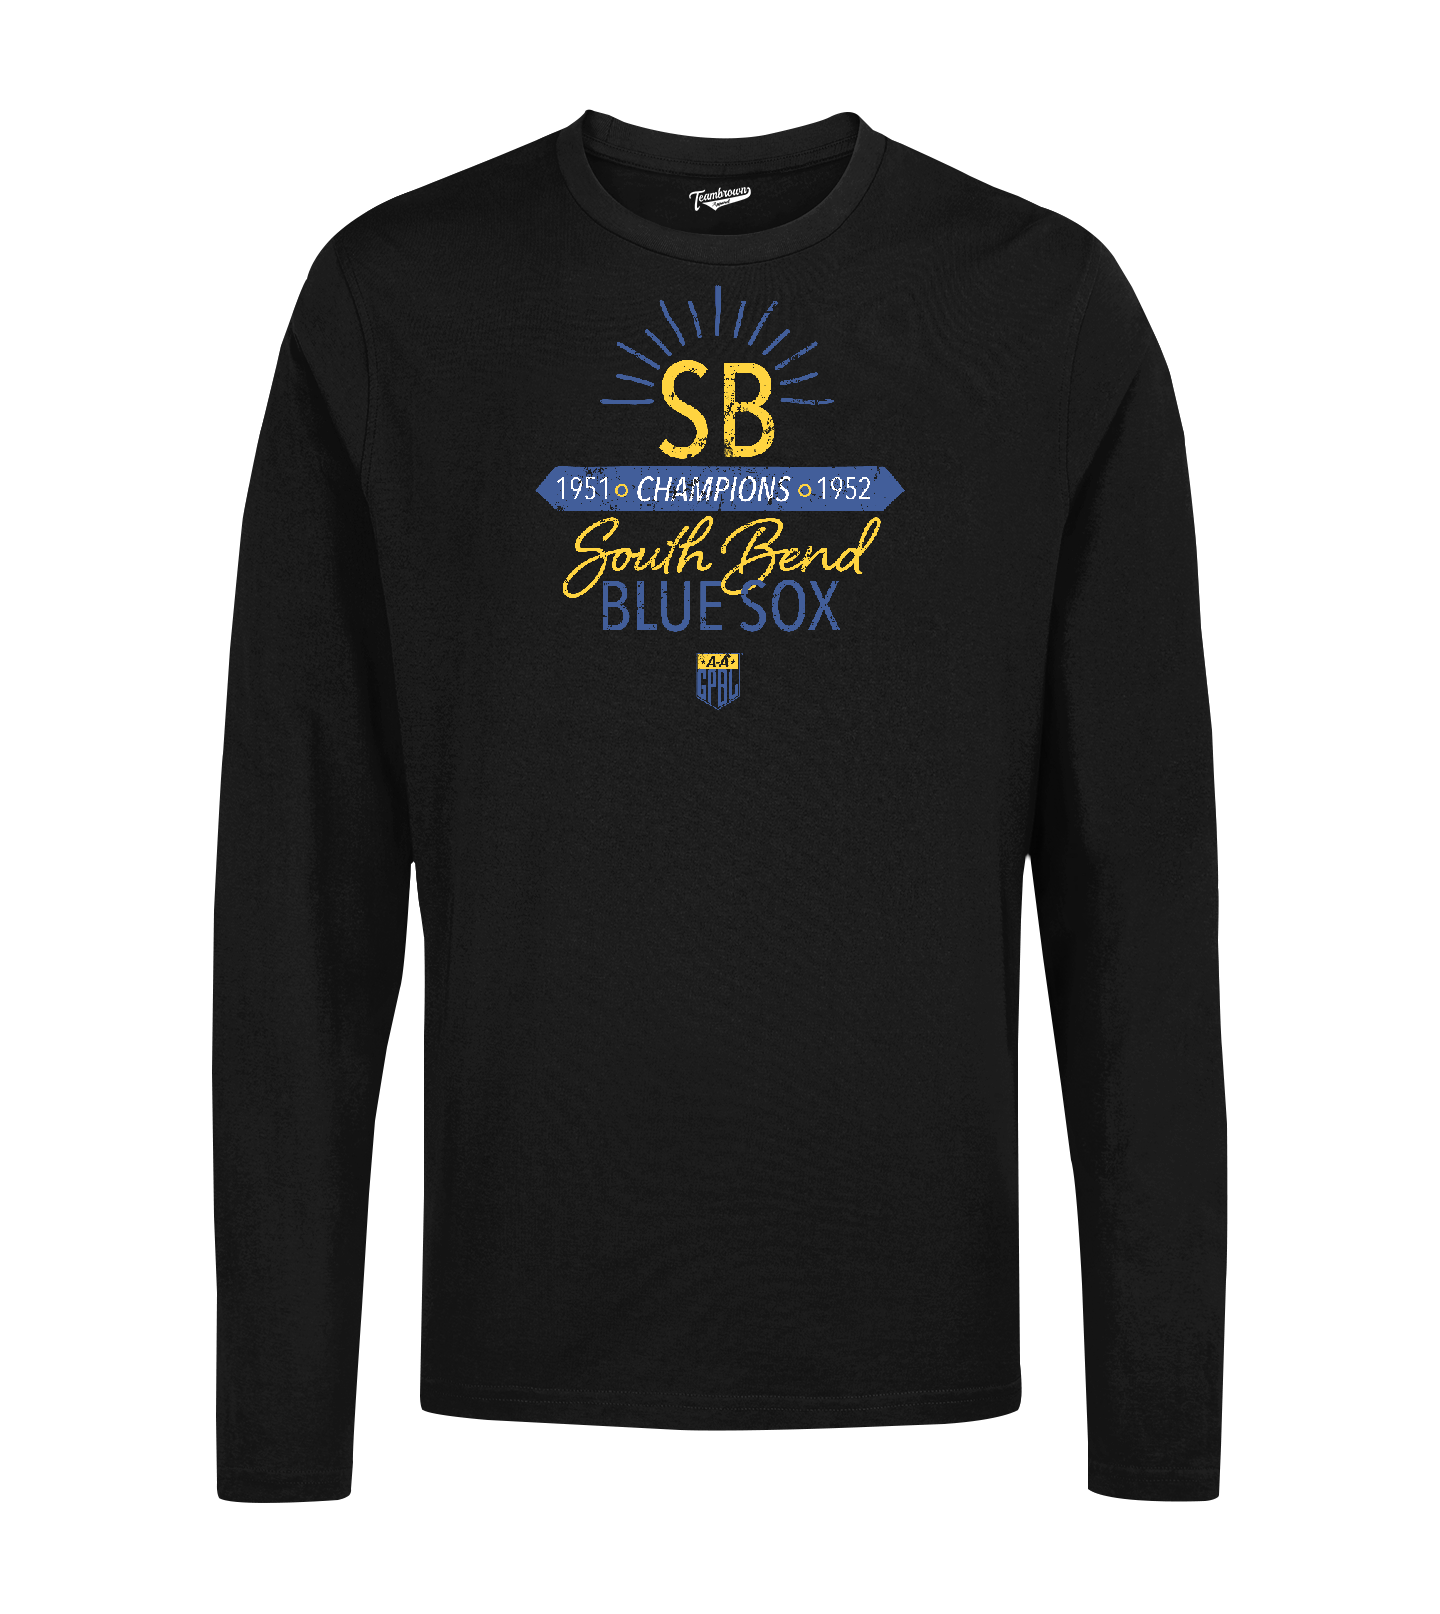 South Bend Blue Sox Champions - Unisex Long Sleeve Crew T-Shirt | Officially Licensed - AAGPBL